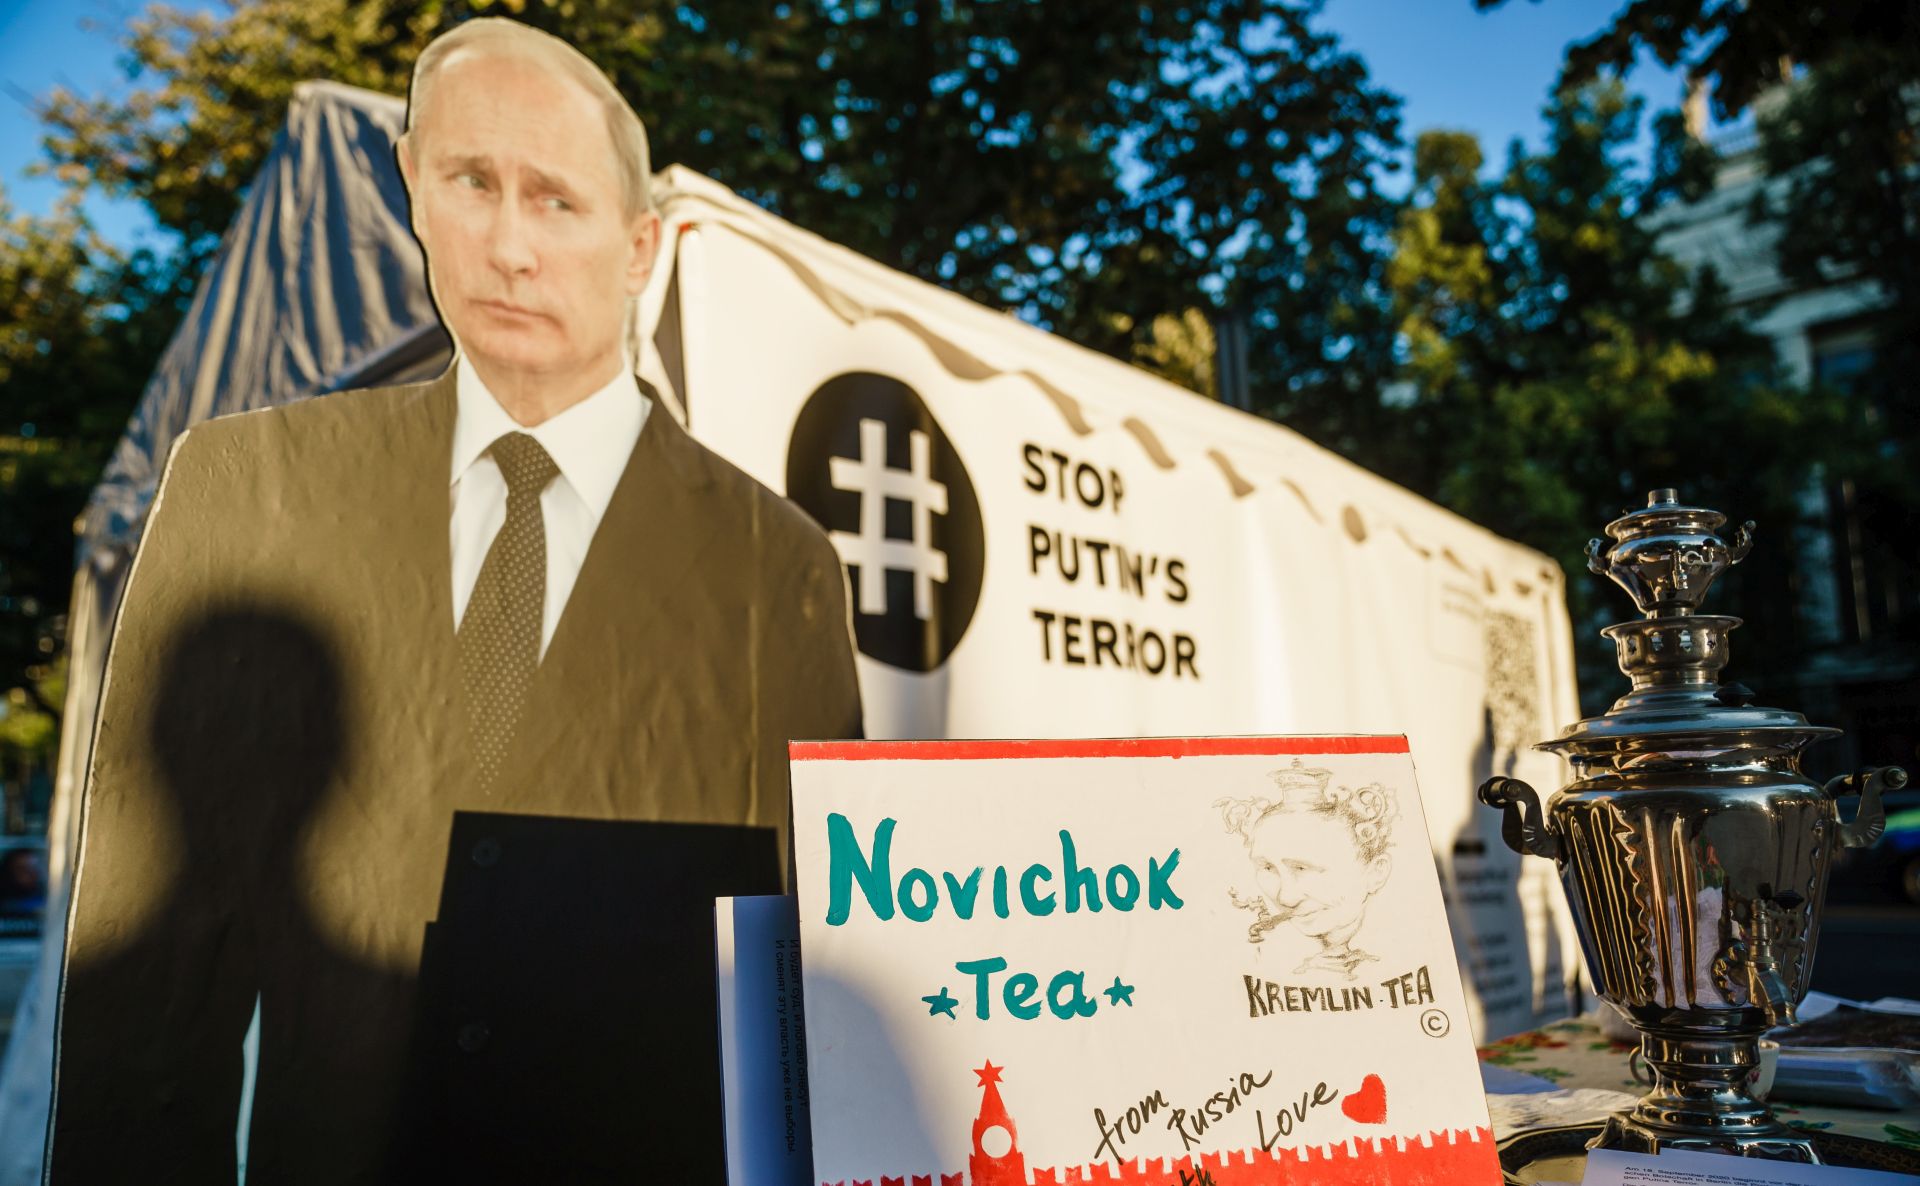 epa08679342 A staged protest in front of the Russian embassy shows a picture of Russian President Vladimir Putin (C), Russian opposition activist Alexei Navalny (L) and a Russian teapot samovar with a note reading 'Novichok tea', 'Kremlin tea' and 'from Russia with love', in Berlin, Germany, 16 September 2020. Navalny is receiving treatment at the Charite hospital in Berlin since 22 August 2020 after being poisoned with a nerve agent from the Novichok group.  EPA/CLEMENS BILAN